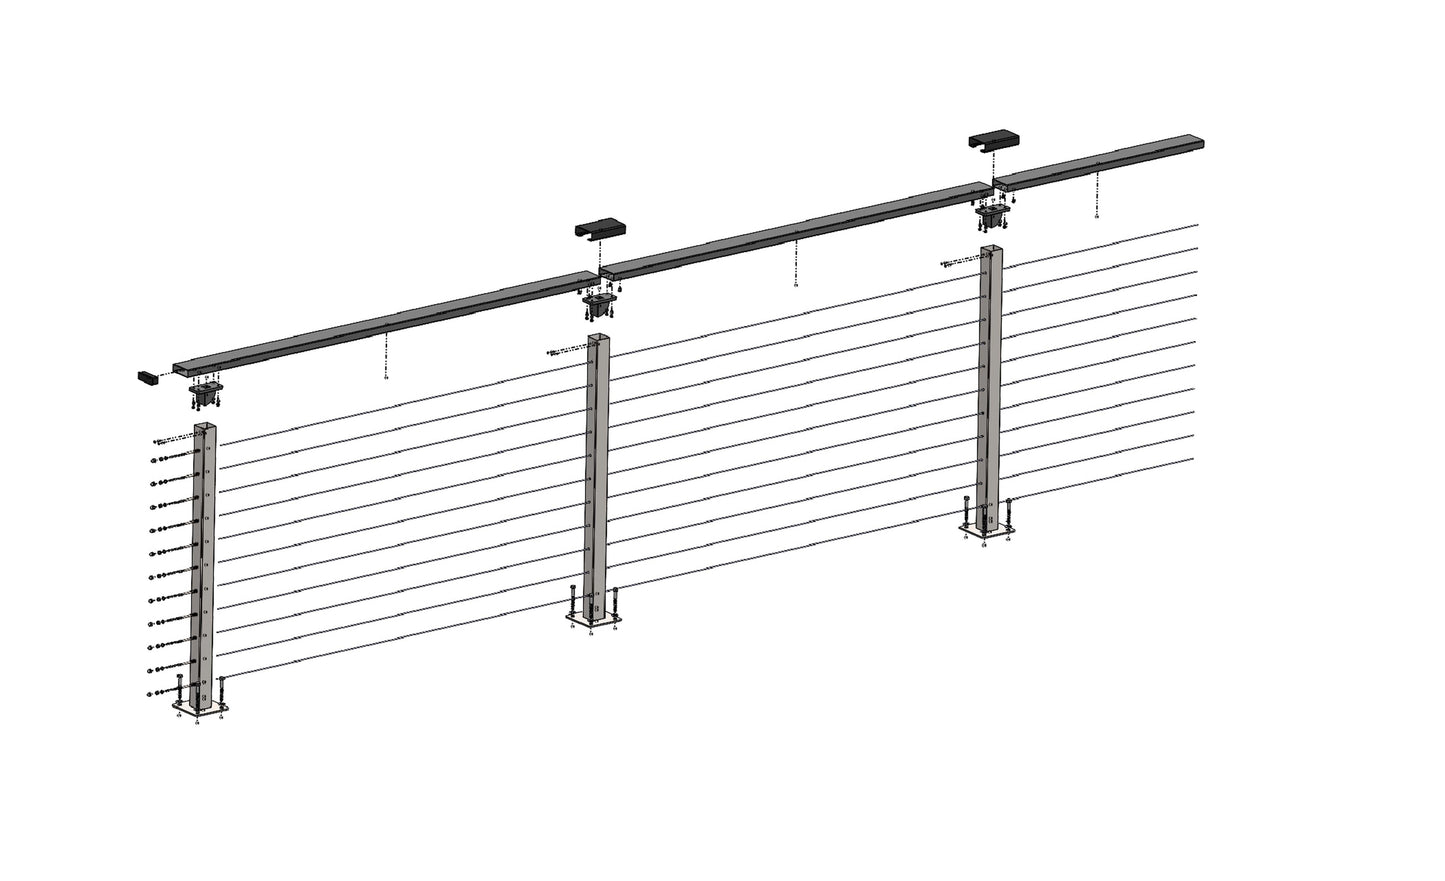 33 ft. x 42 in. Black Deck Cable Railing, Base Mount